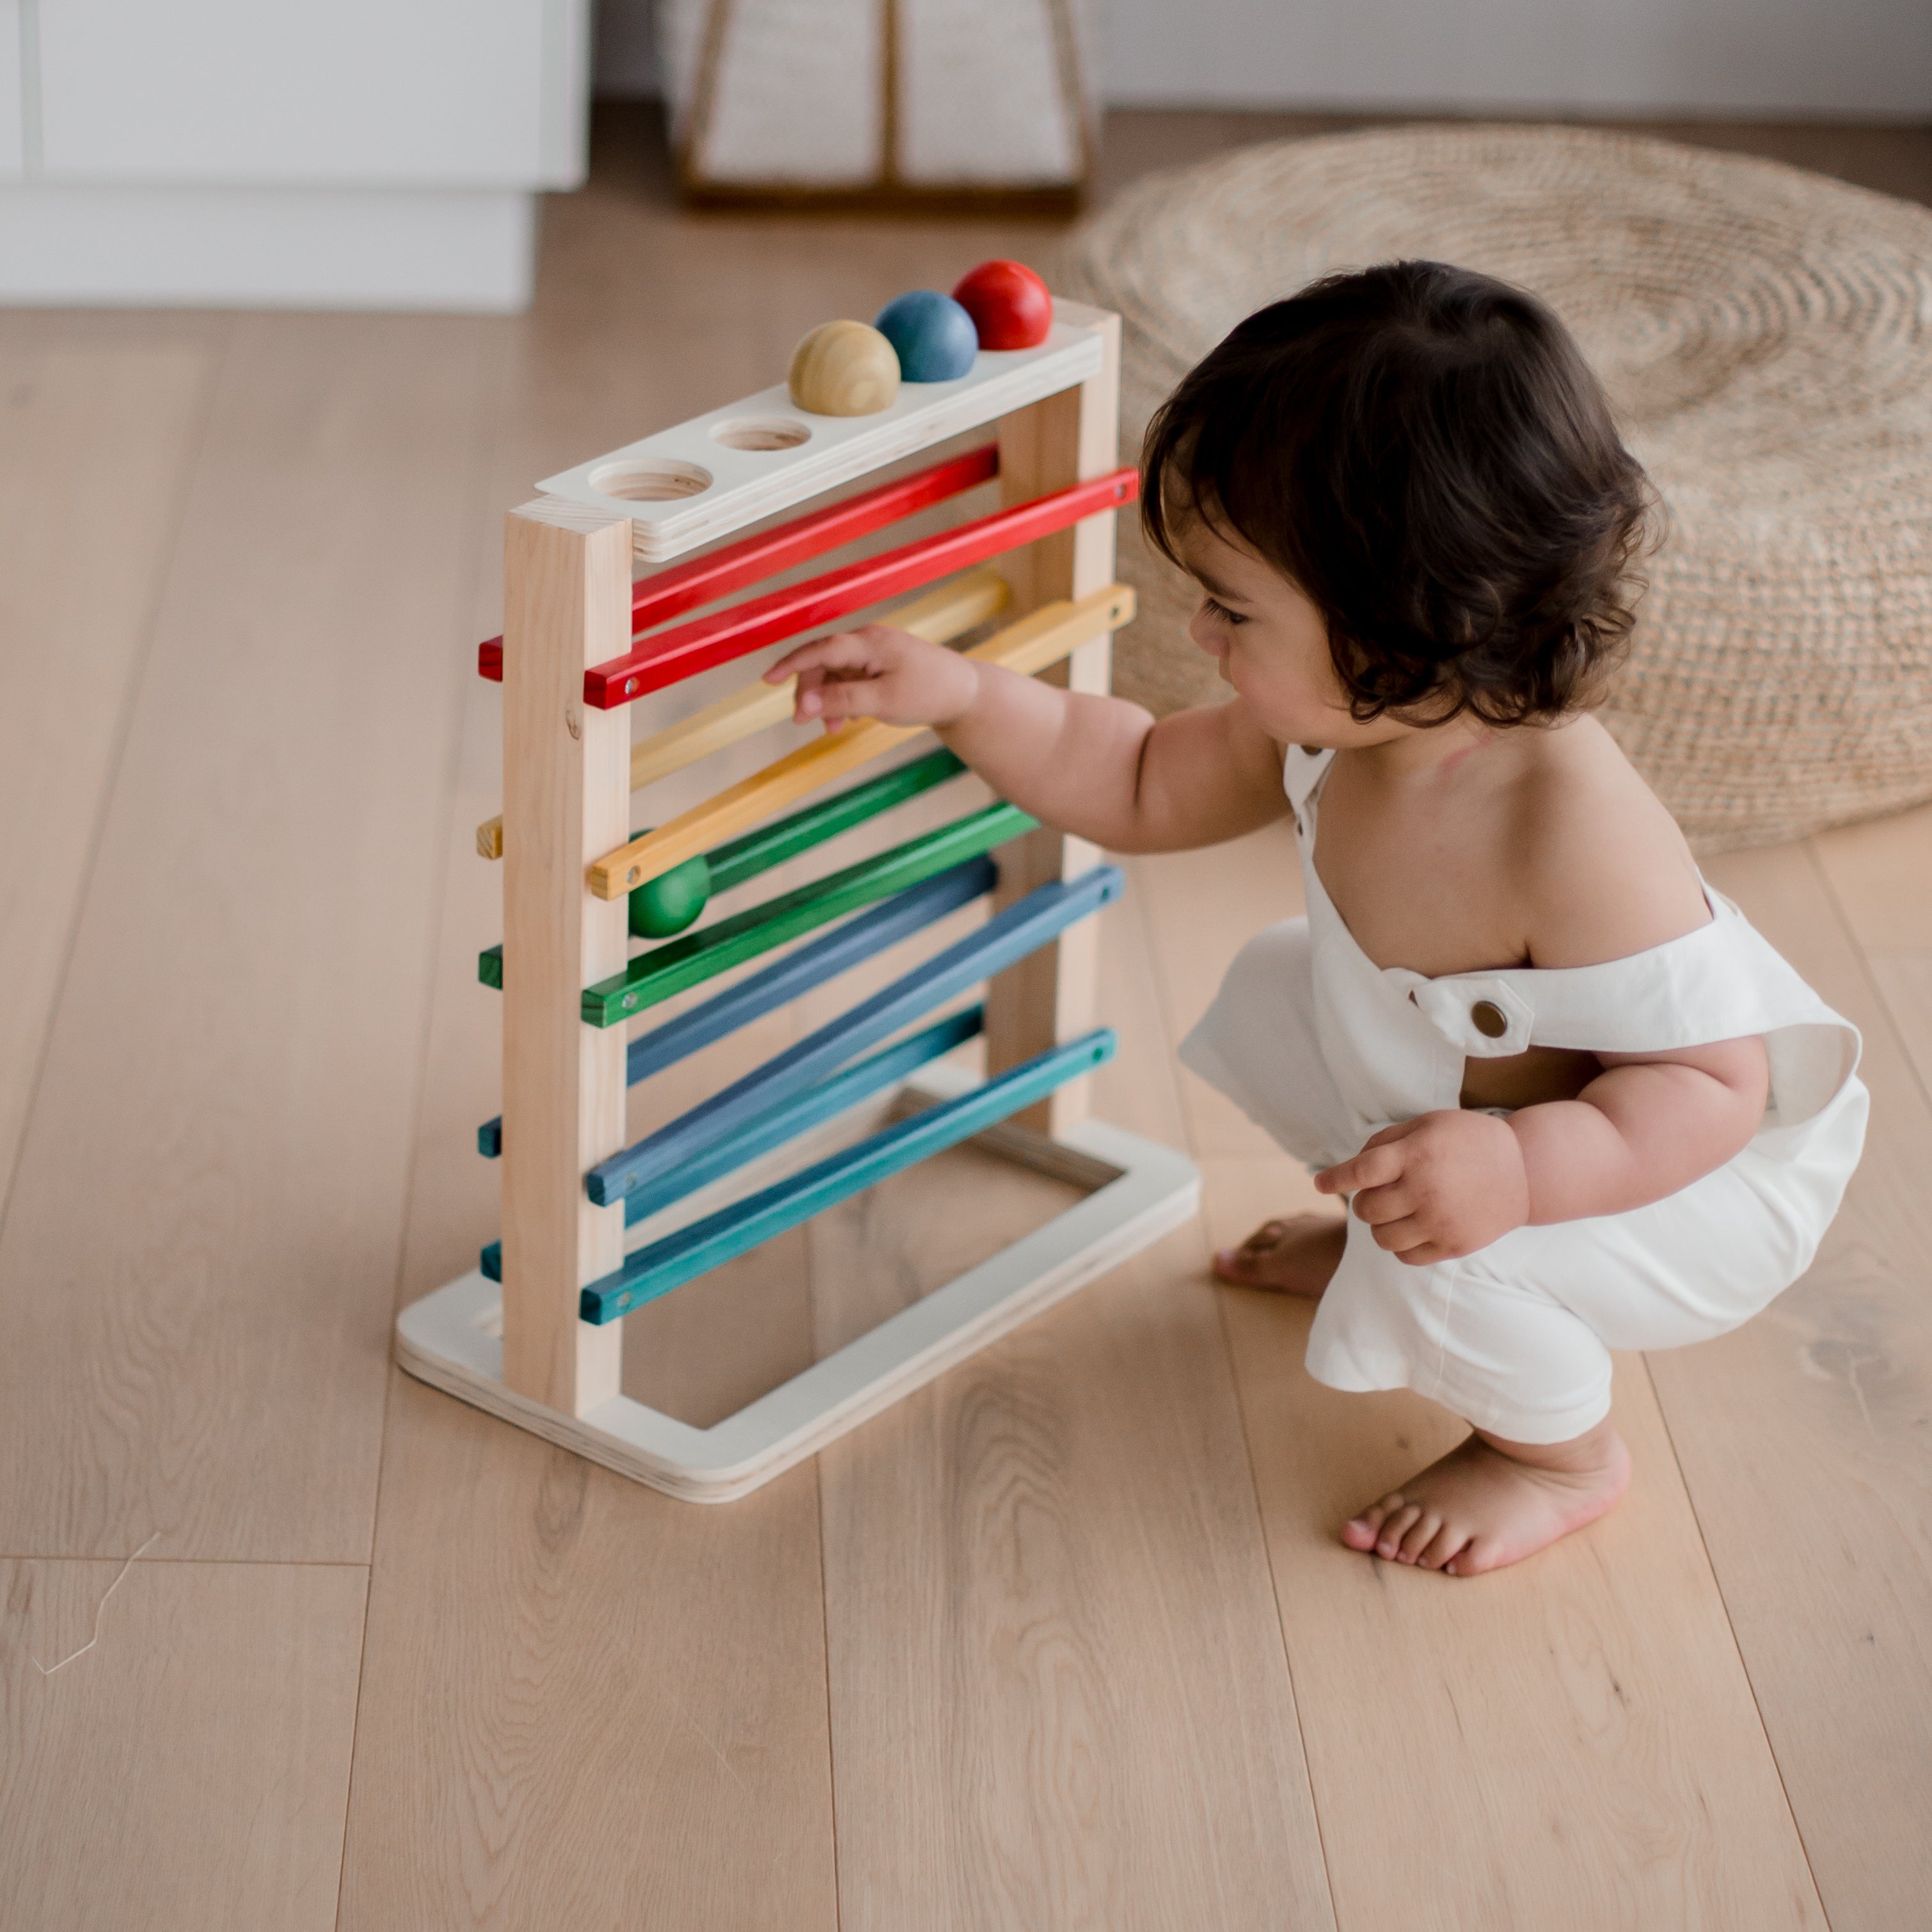 Child playing with QToys track a ball rack